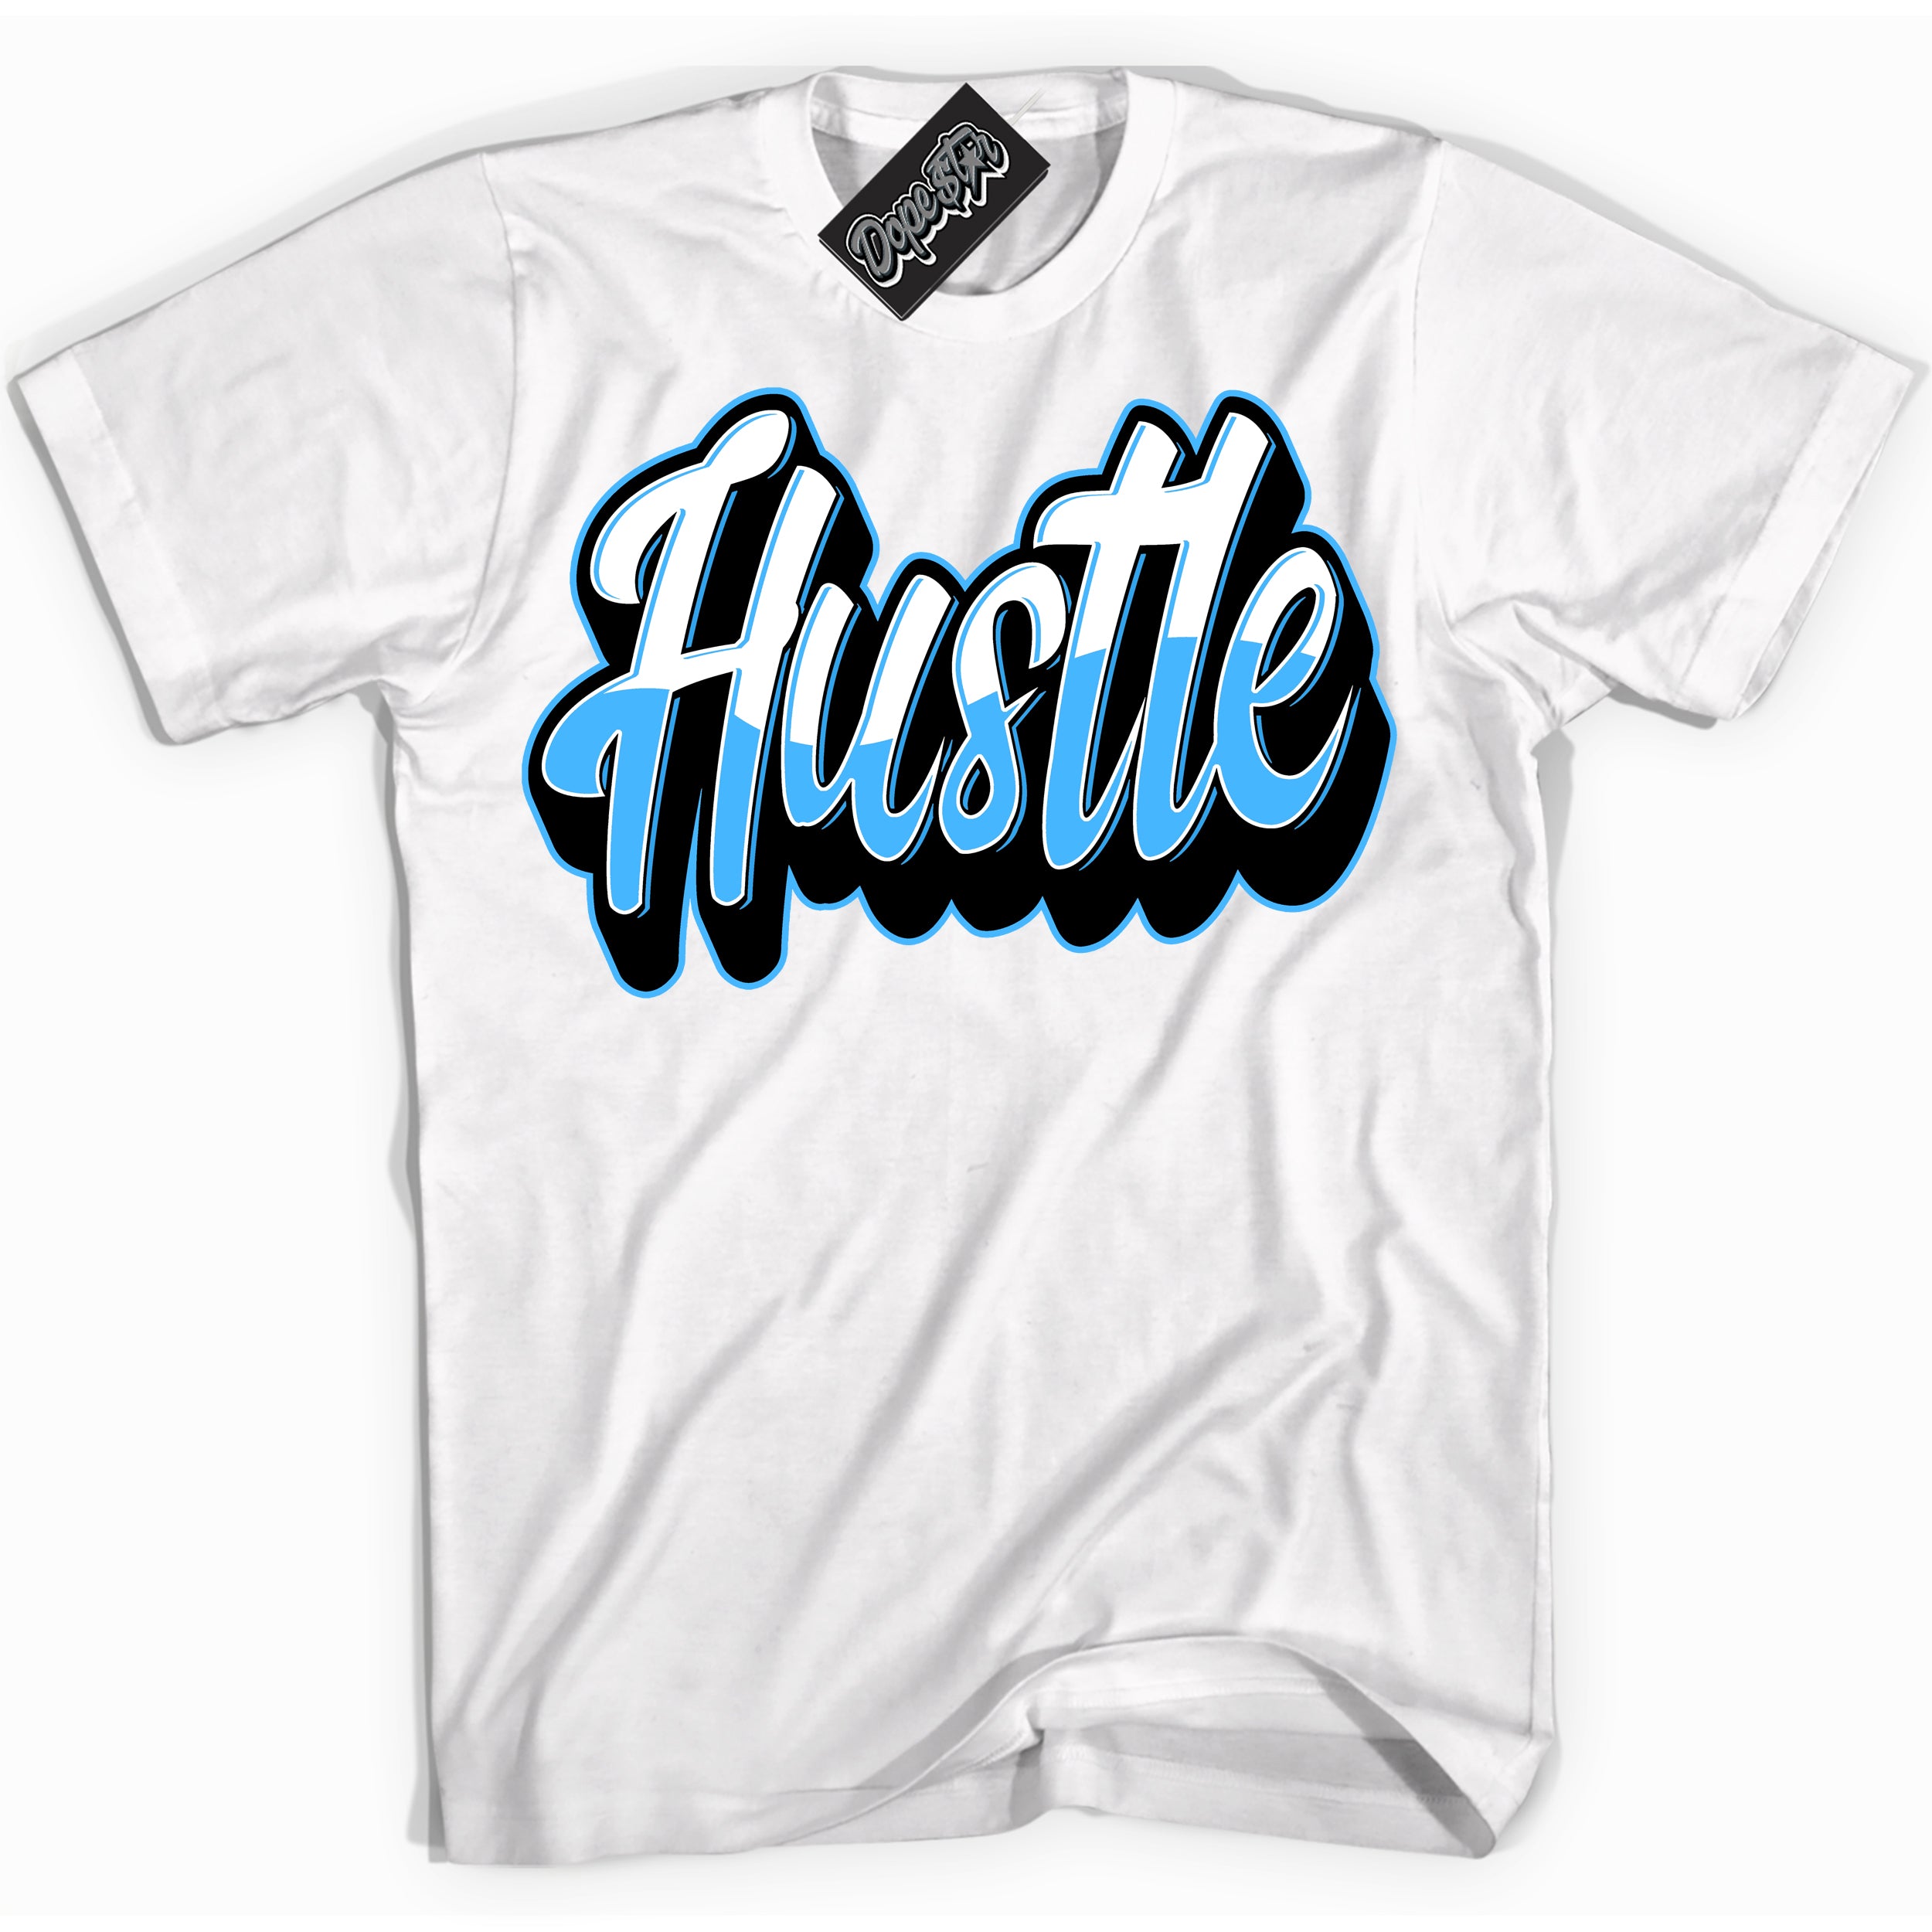 Cool White graphic tee with “ Hustle 2 ” design, that perfectly matches Powder Blue 9s sneakers 